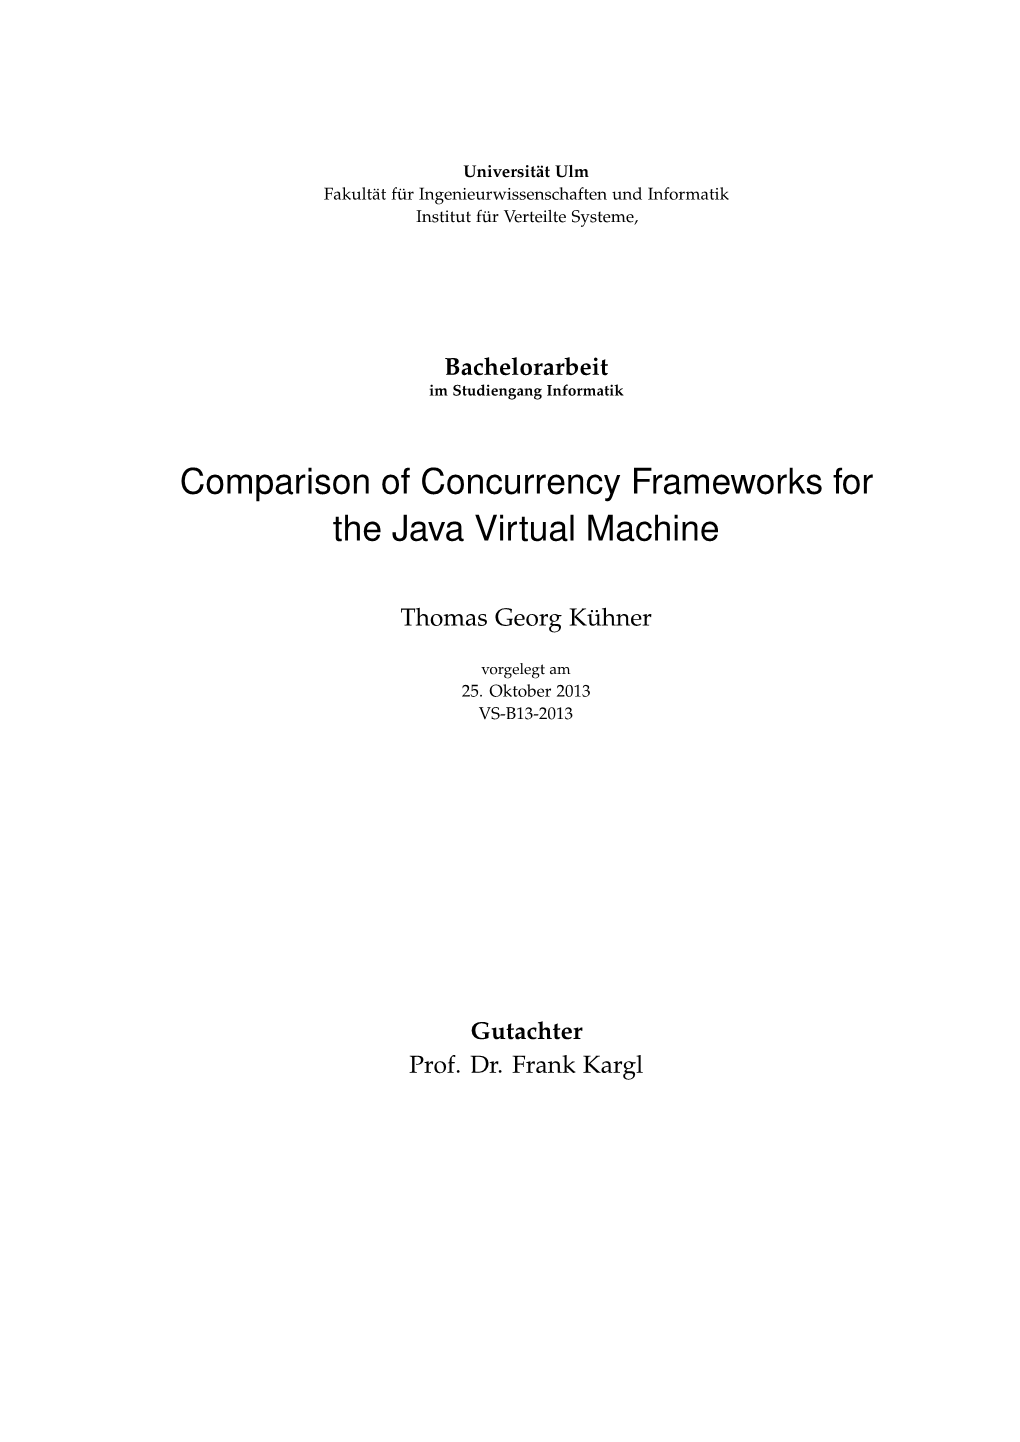 Comparison of Concurrency Frameworks for the Java Virtual Machine